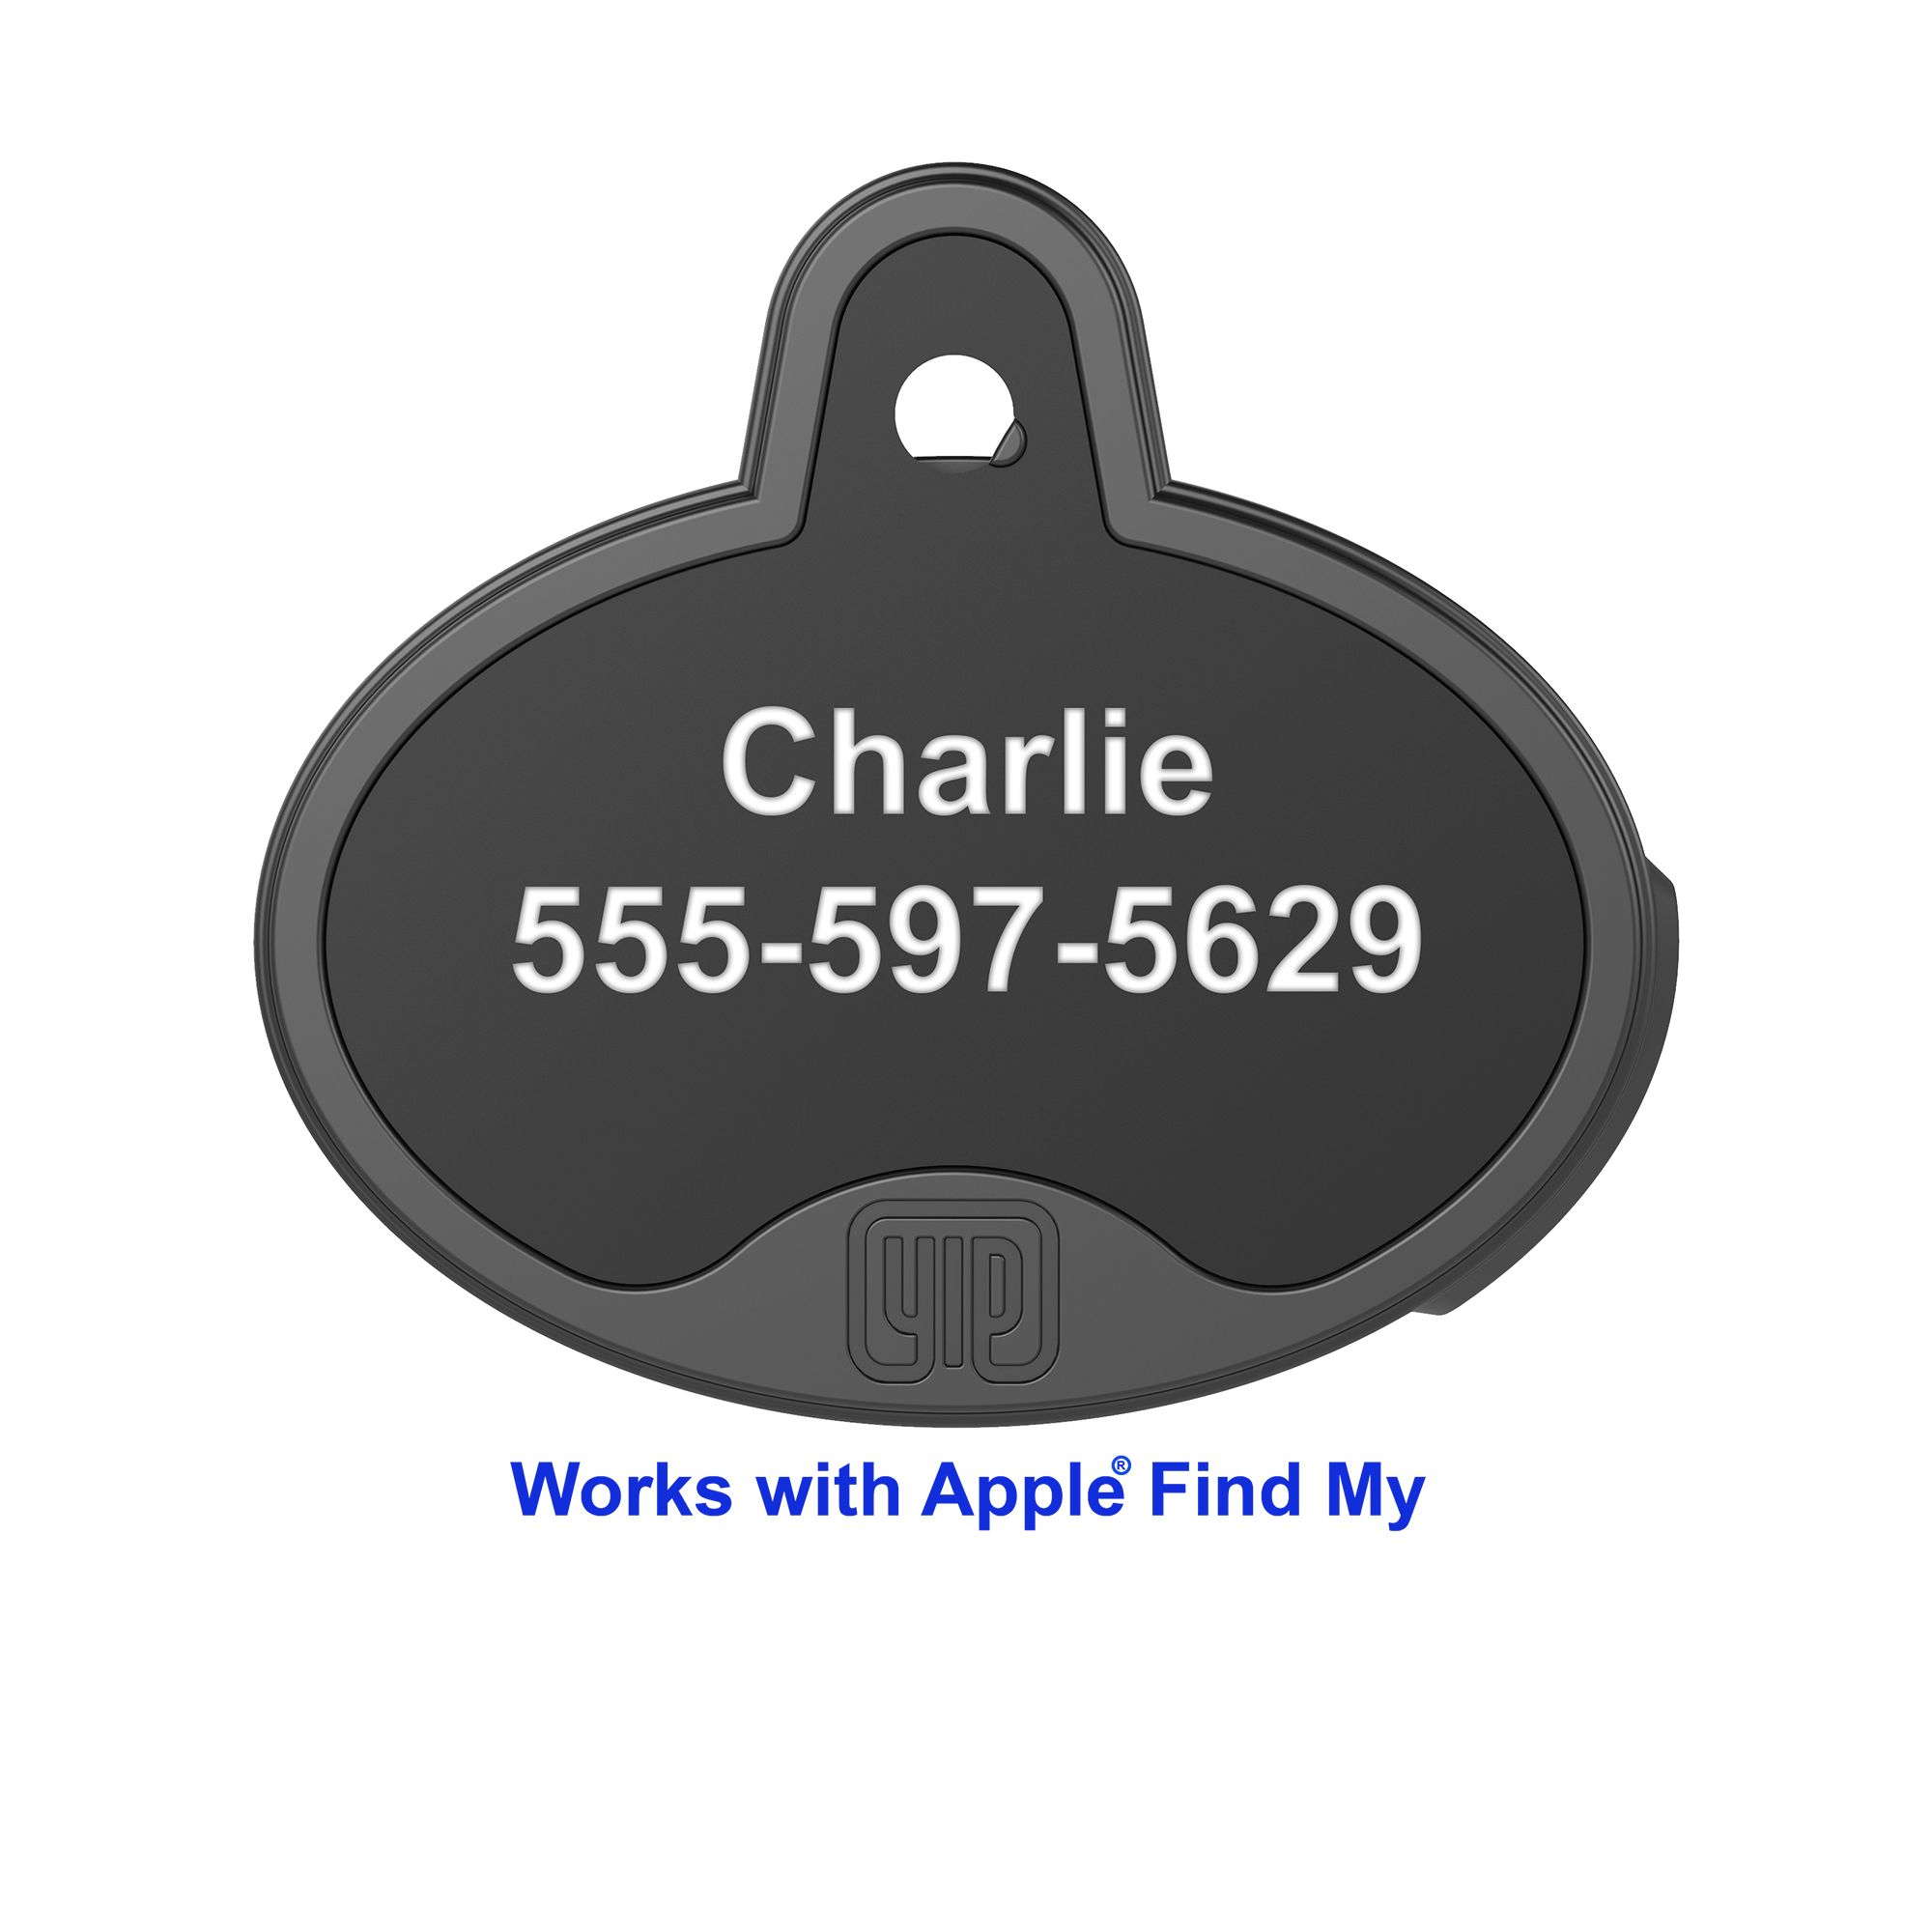 First dedicated dog tag with Find My now available (but there are